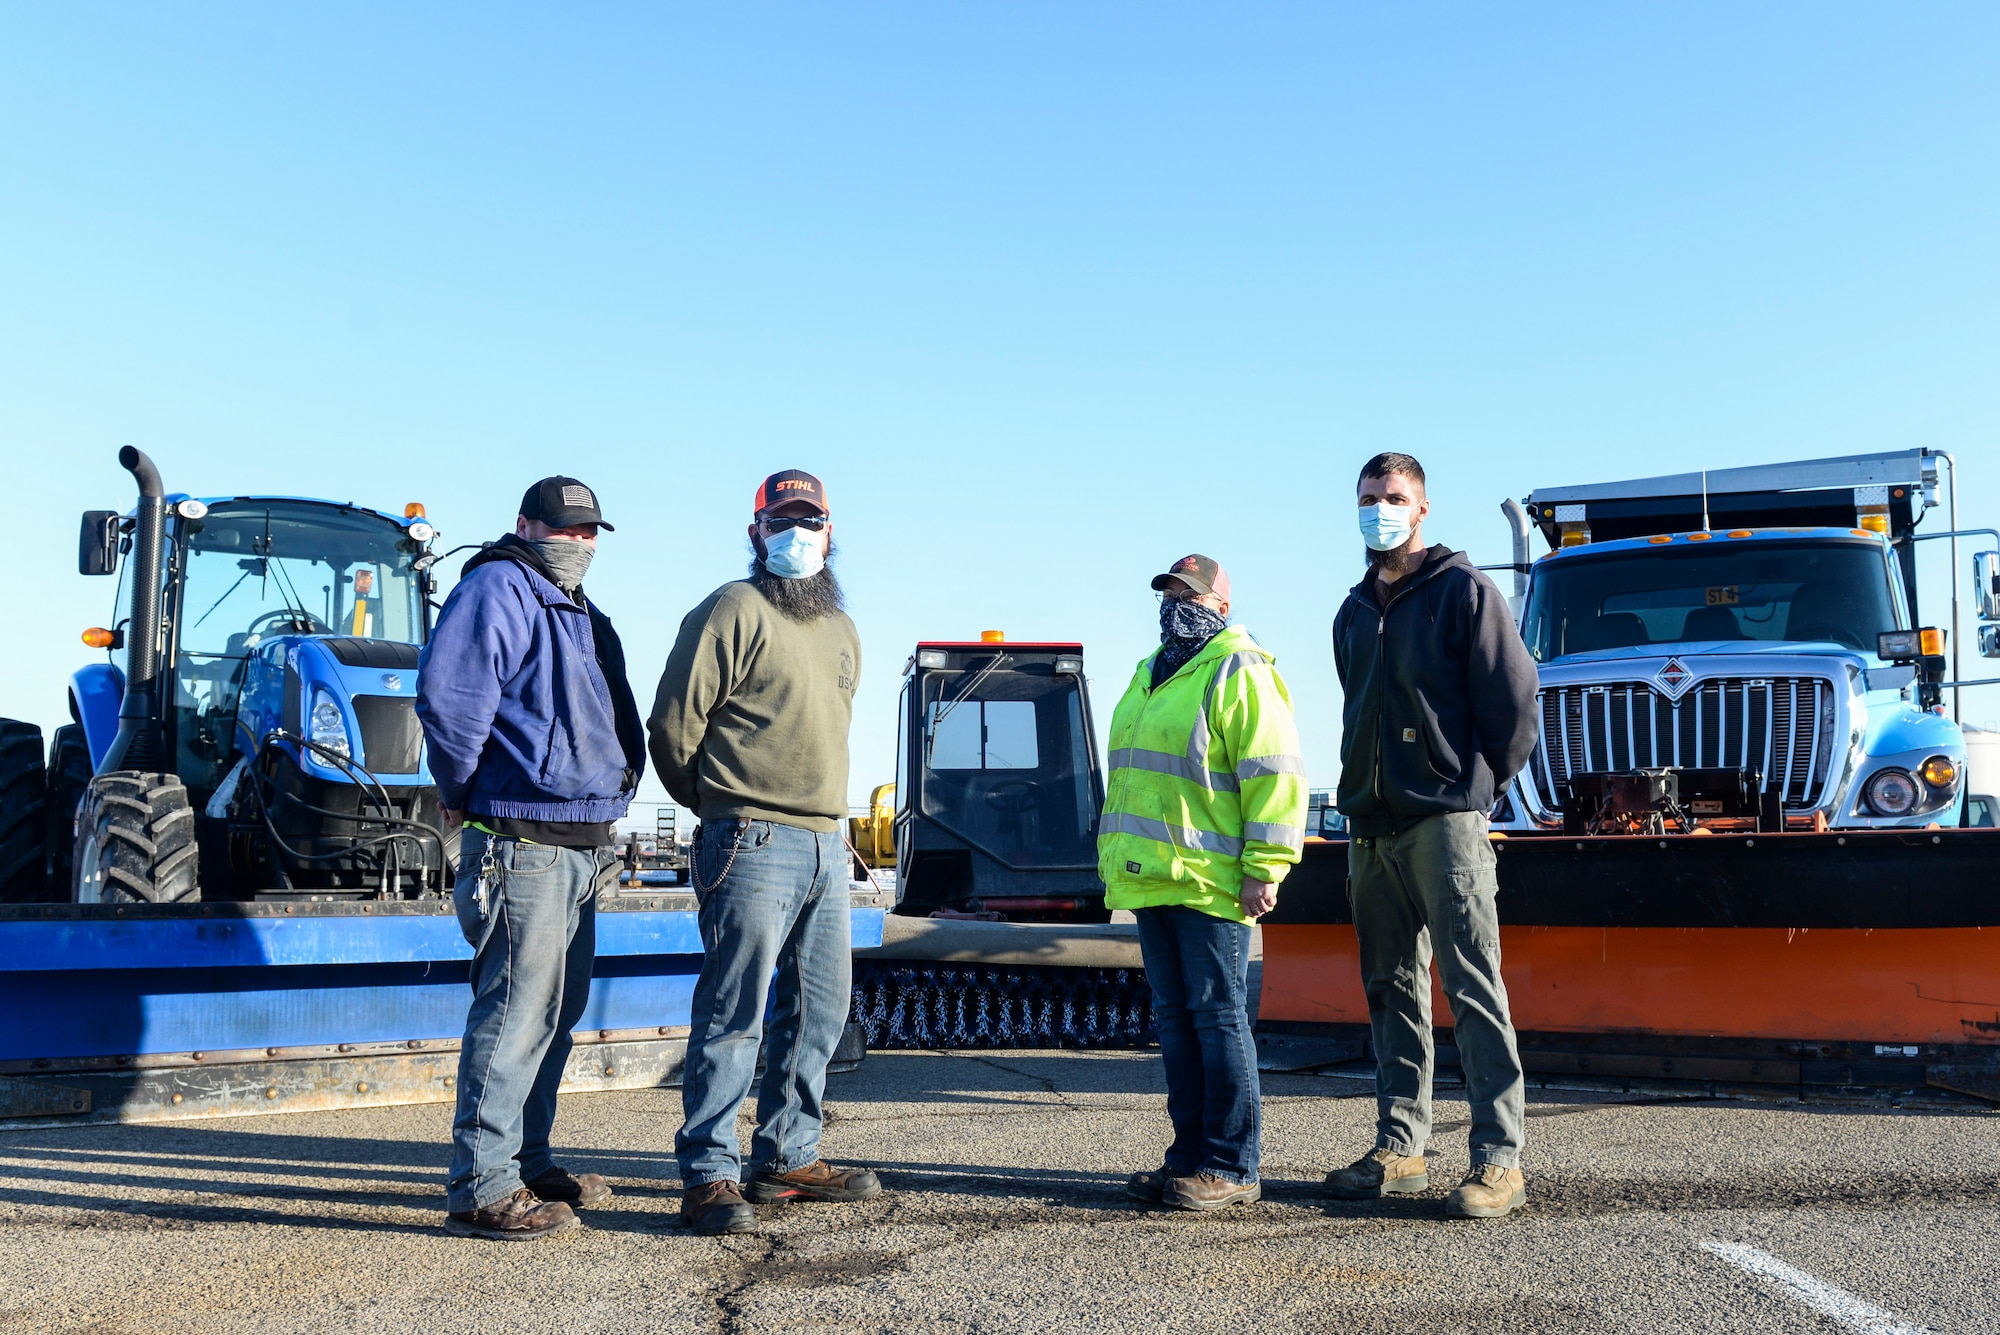 Members of the 88th Civil Engineer Squadron snow removal team pose in front of some of a couple snow plows and a sidewalk sweeper outside their building at Wright-Patterson Air Force Base, Ohio, Feb. 23, 2020. From November to April the team runs 24-hour operations with as many as 30 pieces of equipment to ensure the mission of Wright-Patt can continue. (U.S. Air Force photo by Wesley Farnsworth)